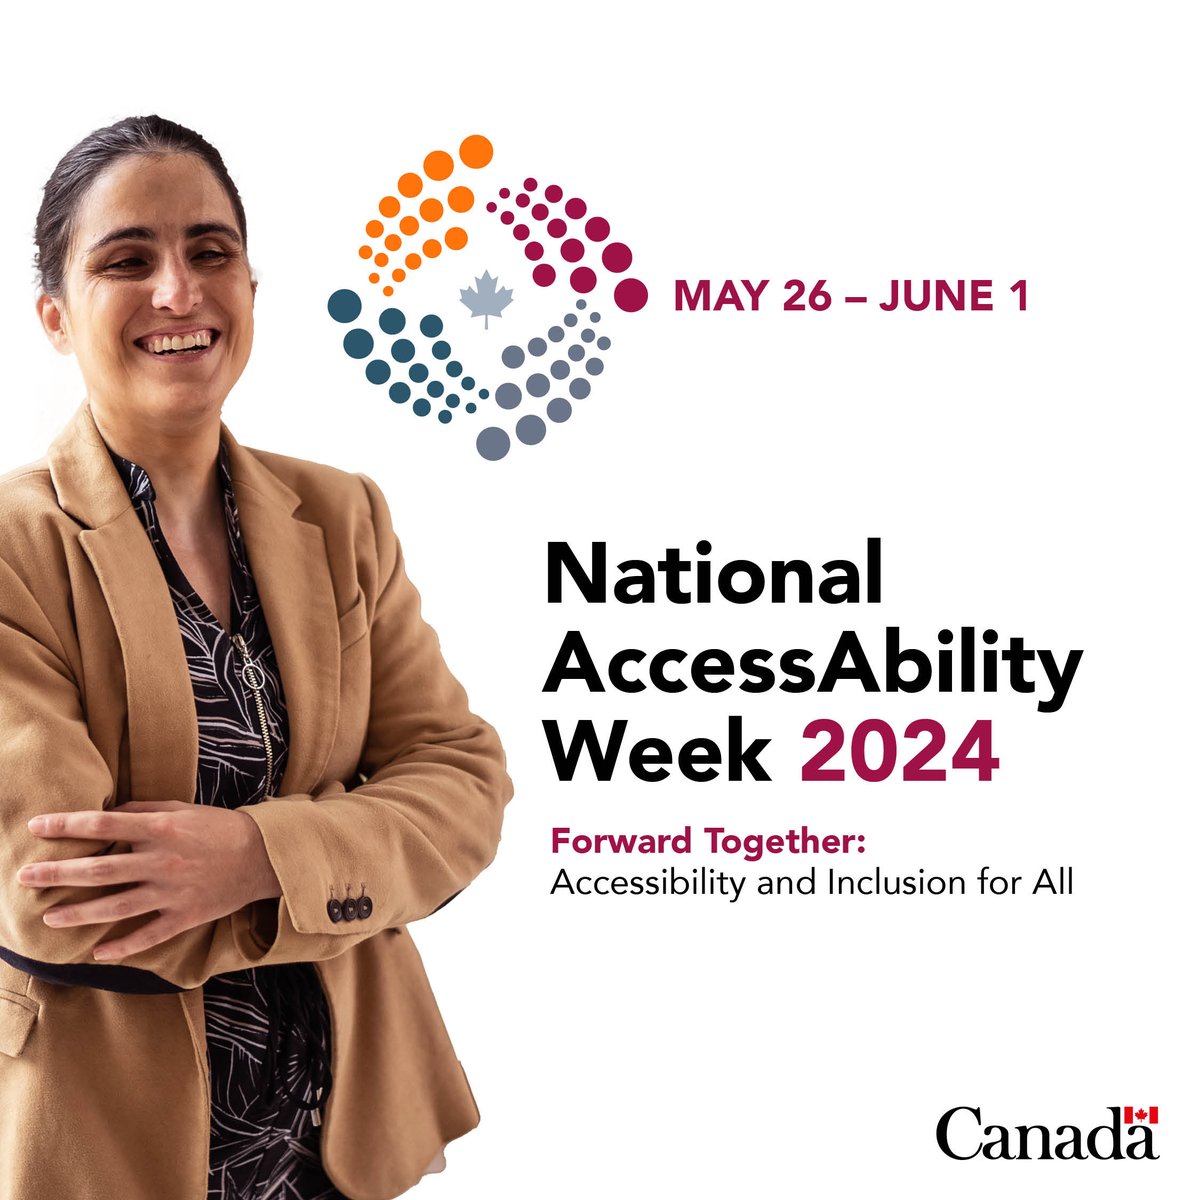 ay 26 to June 1, 2024, is National AccessAbility Week in Canada. A fully inclusive Canada benefits all of us. Our country's strength lies in the diversity of its people—all of its people. @AccessibleGC